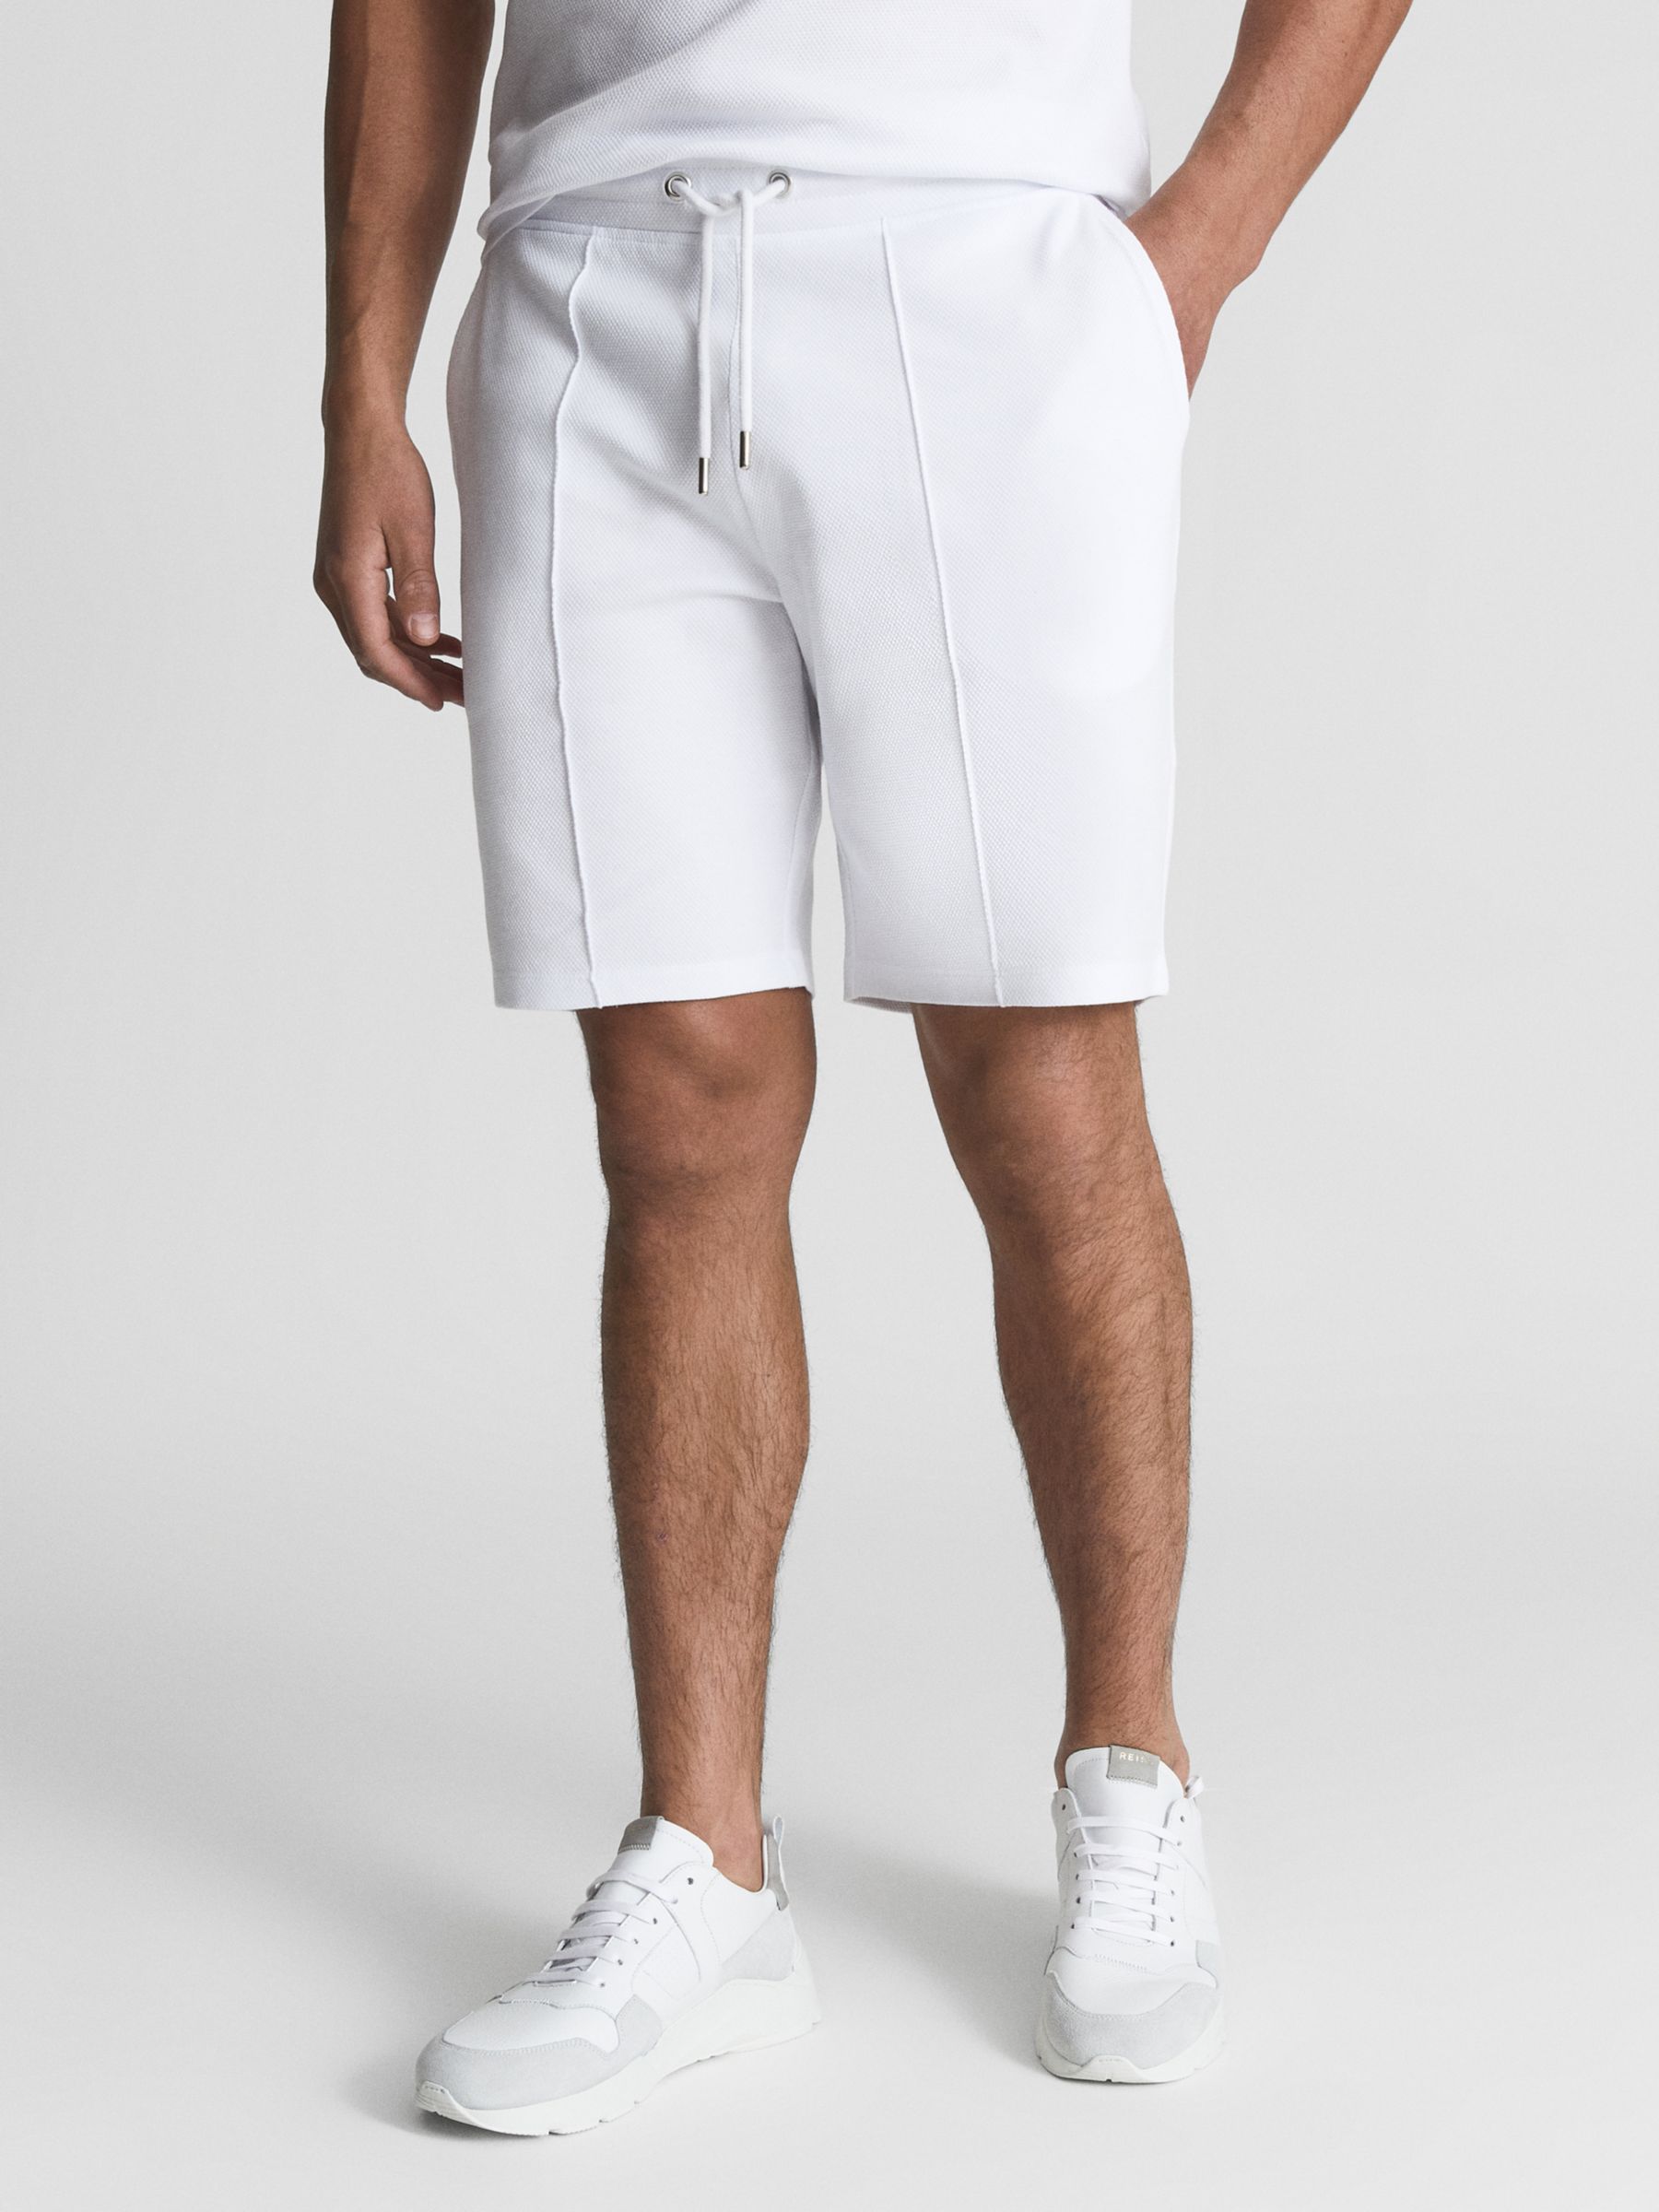 Y-3 Synthetic Shorts & Bermuda Shorts in Black for Men Mens Clothing Shorts Bermuda shorts 